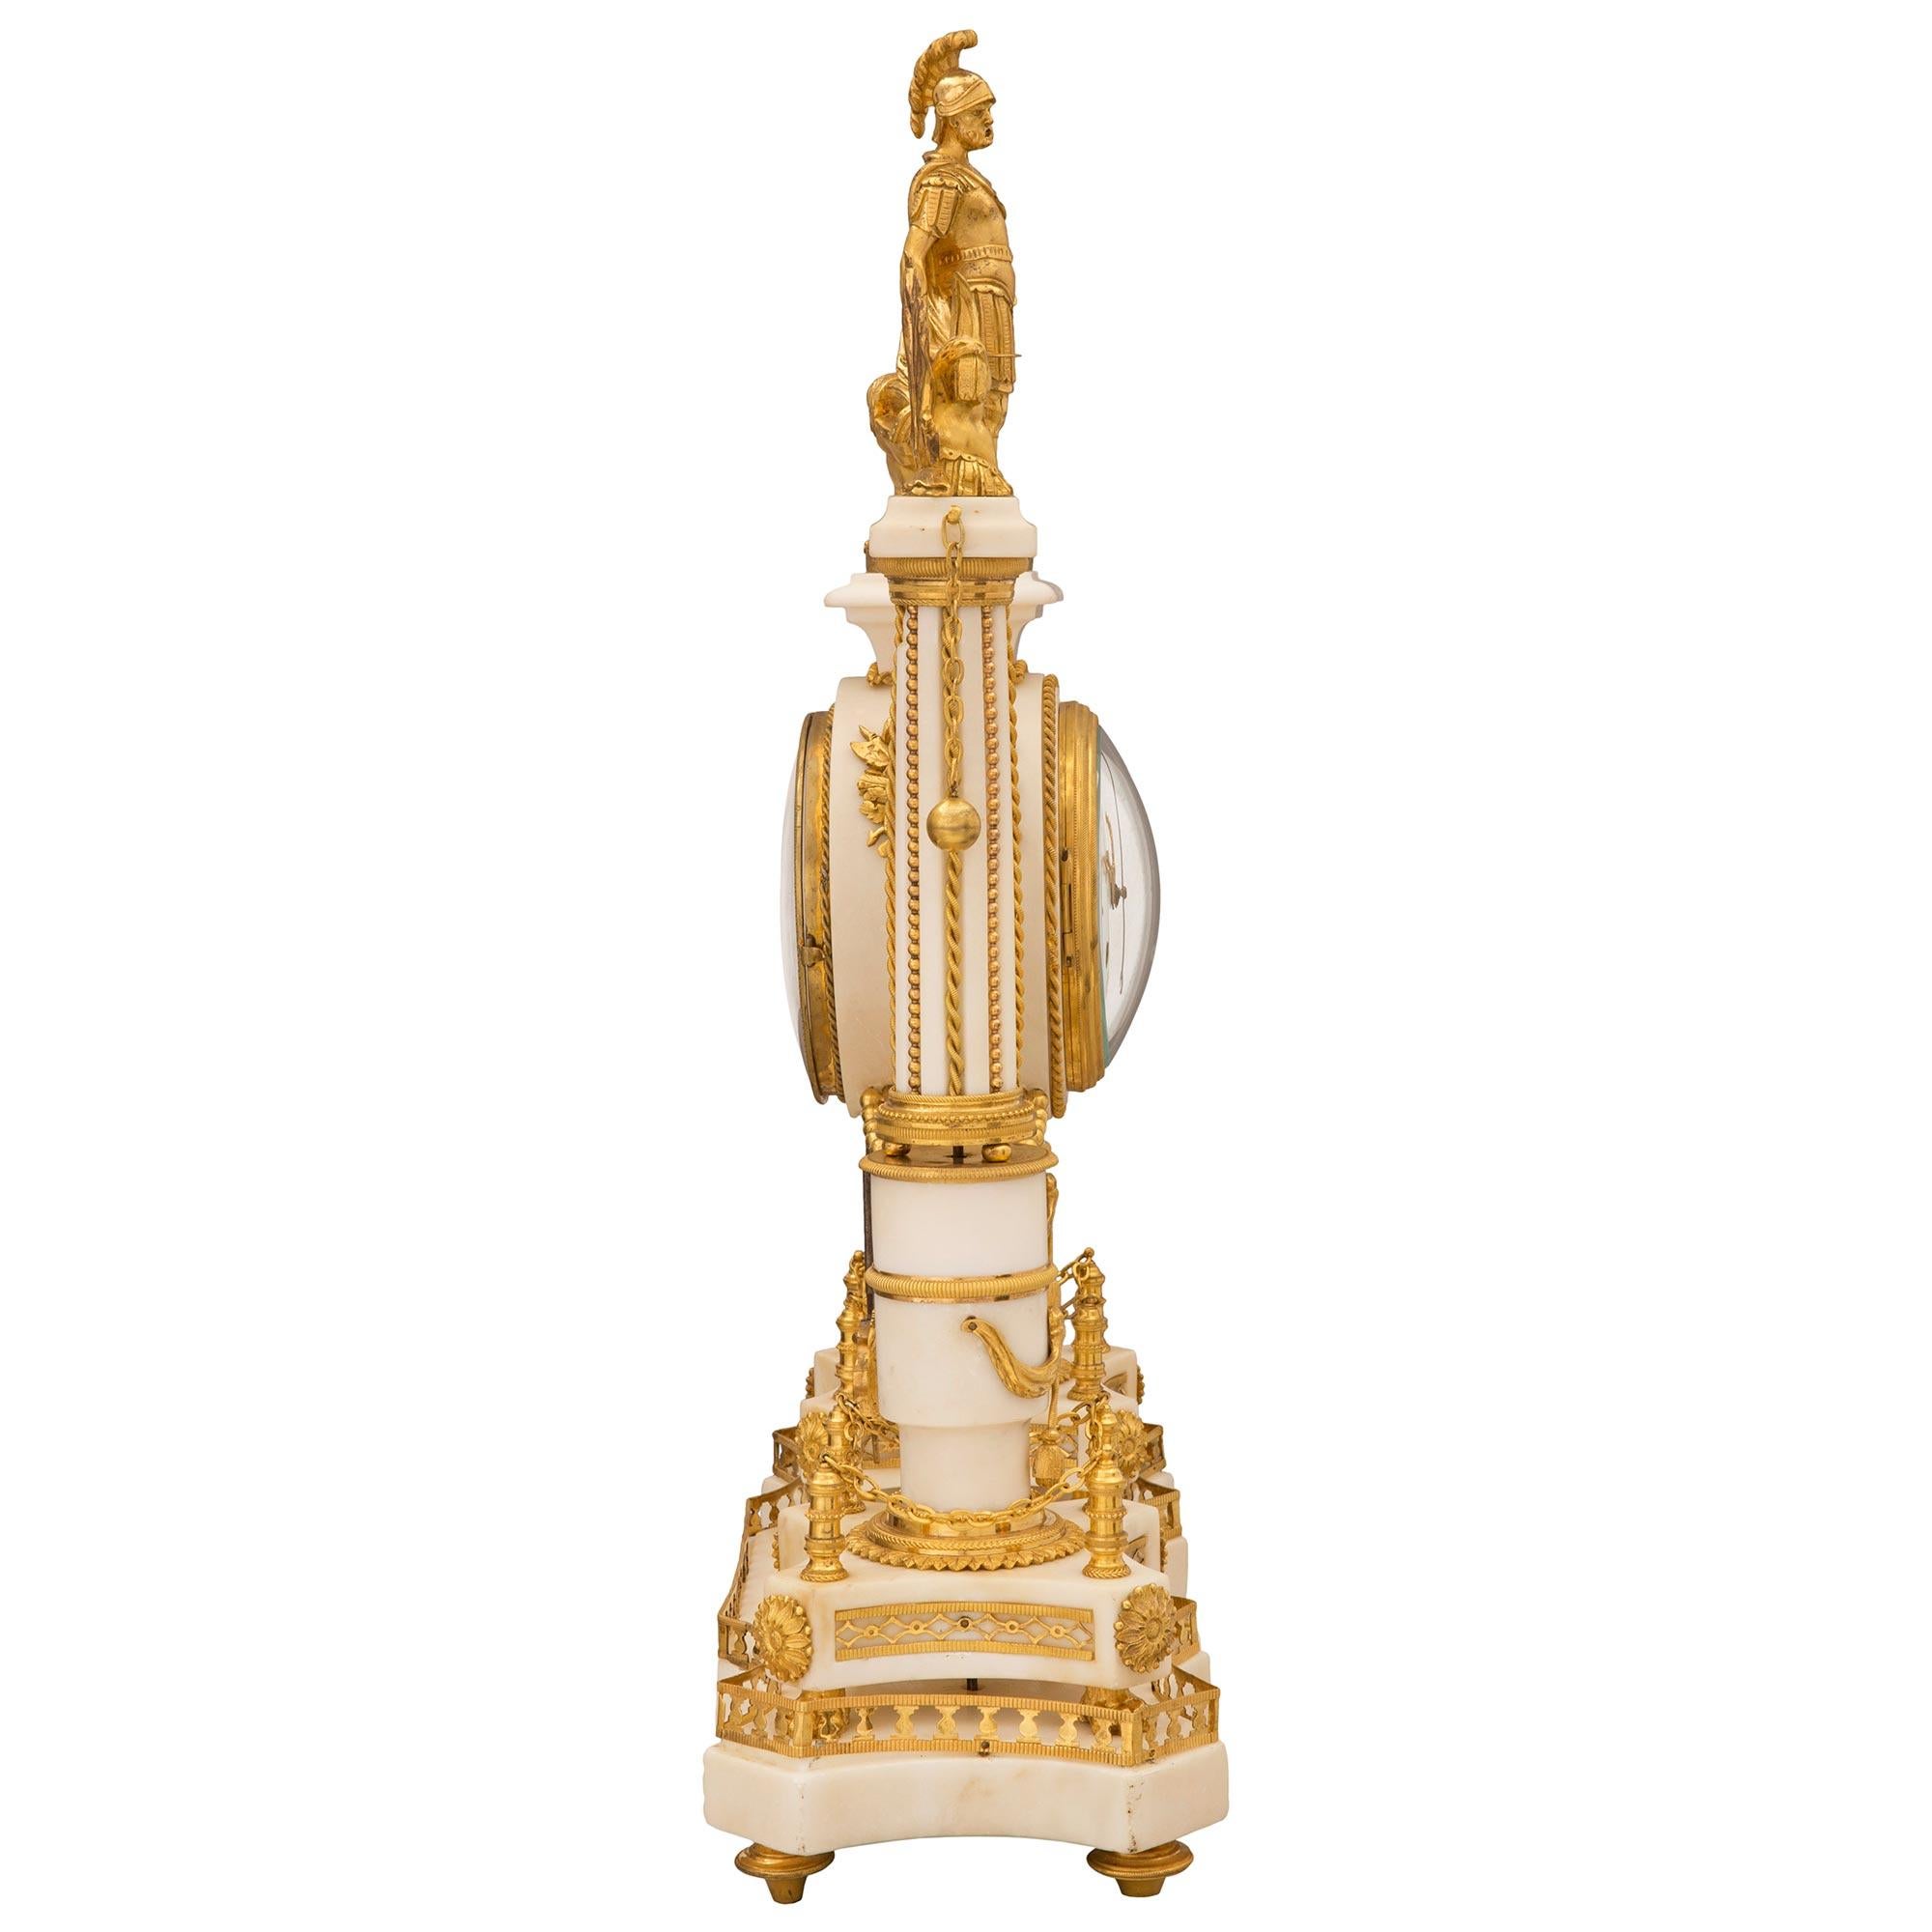 French 19th Century Louis XVI St. Marble and Ormolu Clock, Signed Simona a Paris In Good Condition For Sale In West Palm Beach, FL